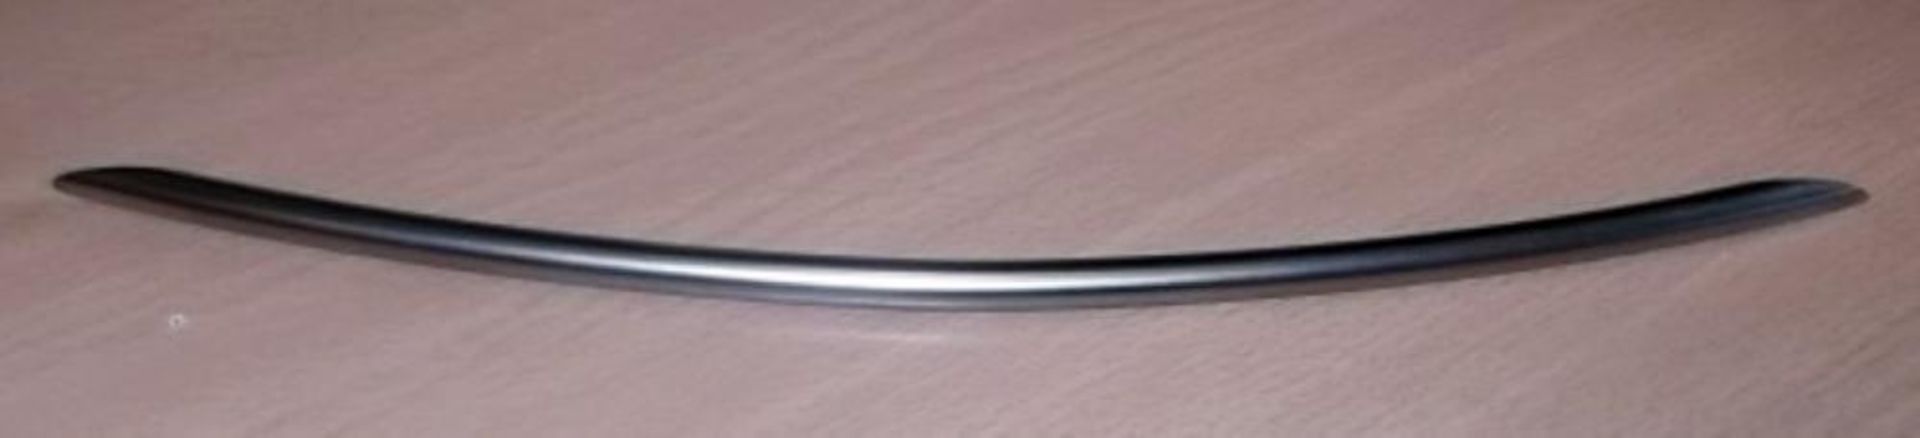 250 x BOW Handle Kitchen Door Handles By Crestwood - 320mm - New Stock - Brushed Nickel Finish - Fix - Image 3 of 10